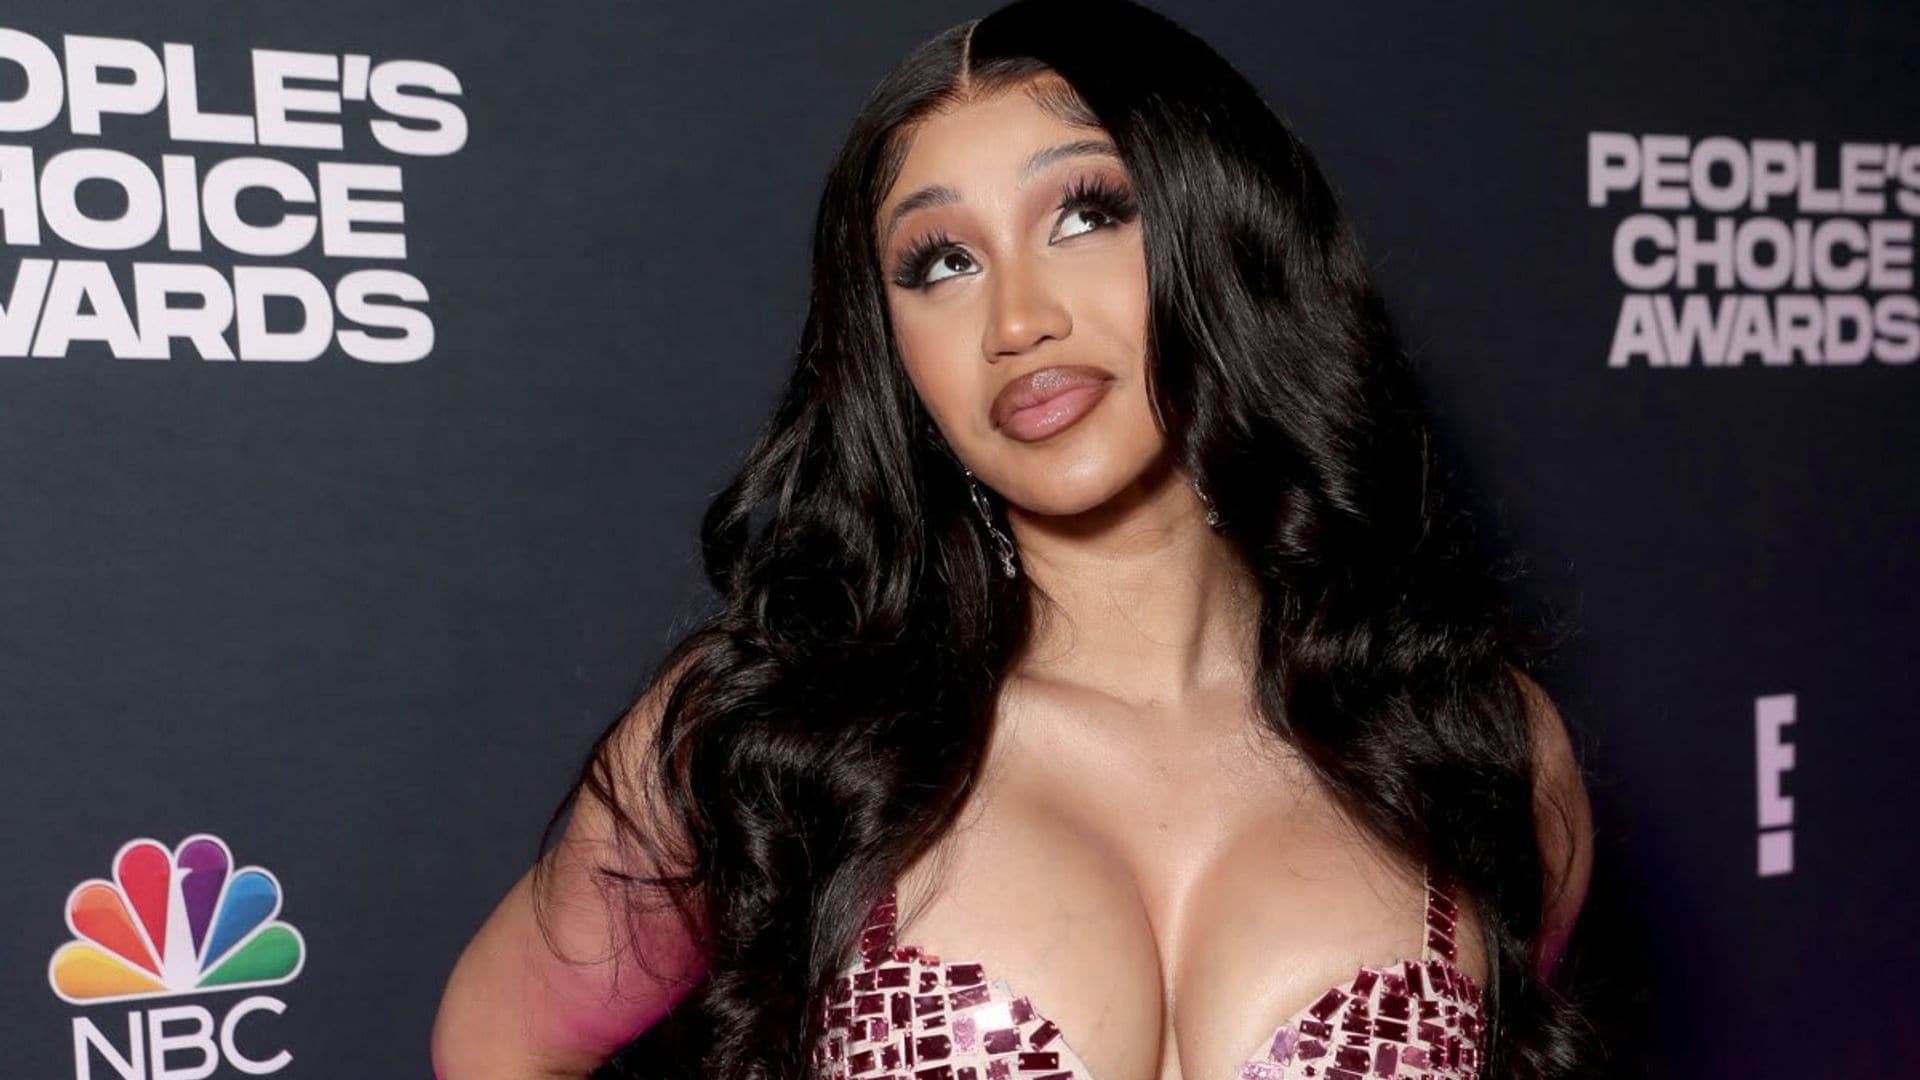 Cardi B claims her 4-month-old son has already said his first words